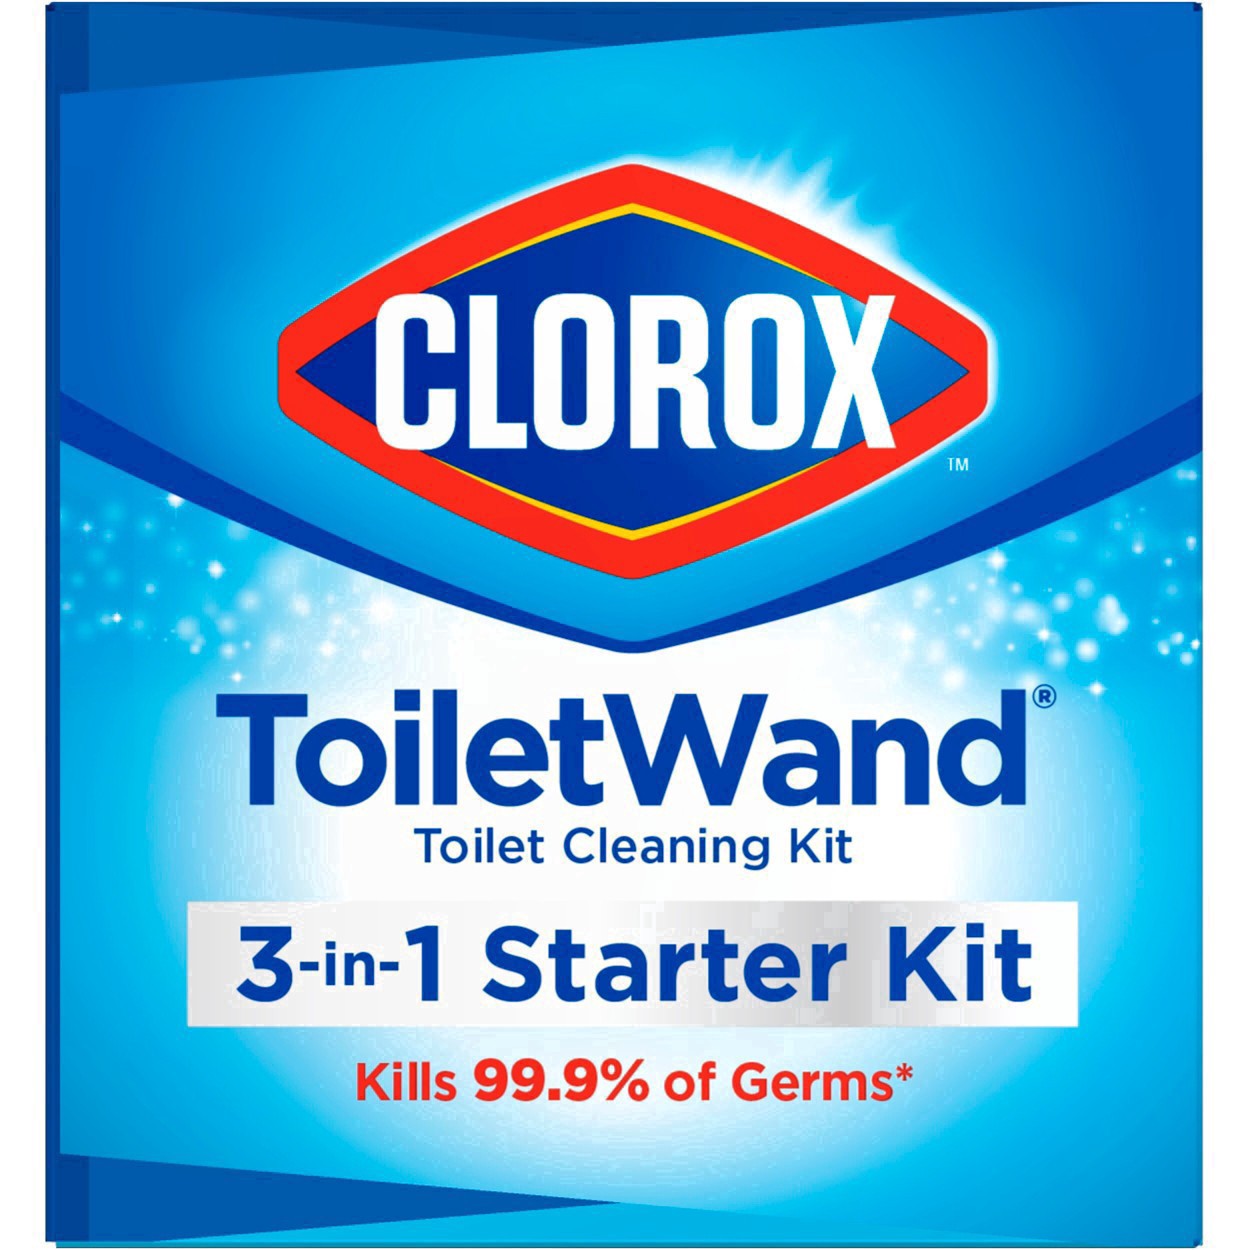 slide 109 of 176, Clorox Toilet Wand 3-in-1 Starter Toliet Cleaning Kit, 1 ct